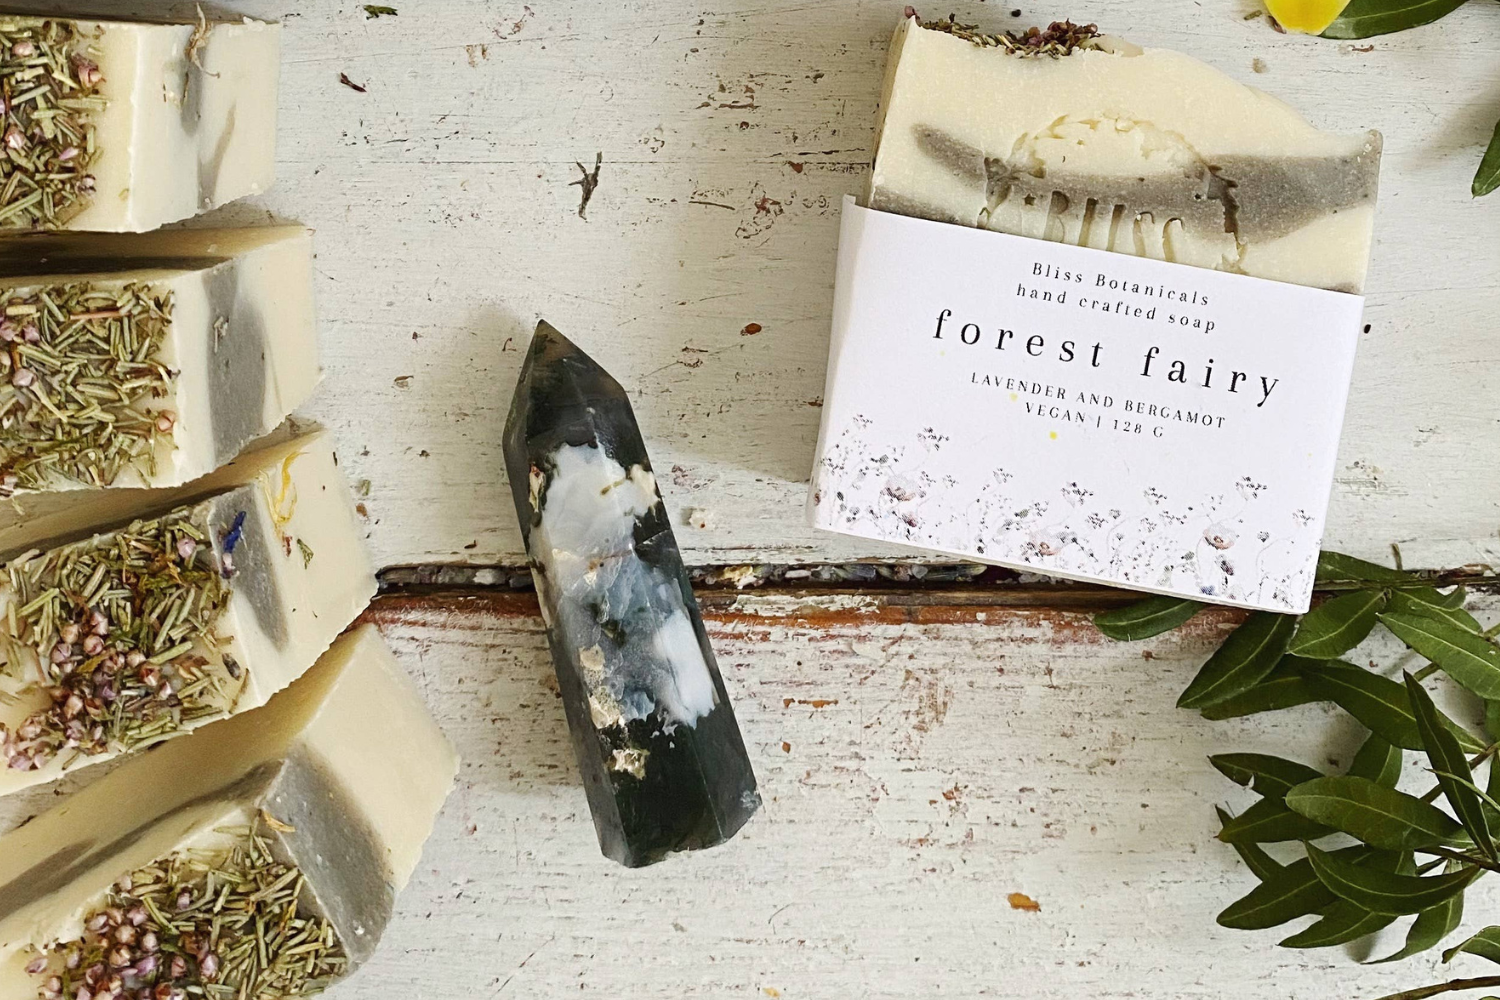 Handmade soap bars with dried herbs on a white wooden surface next to a "forest fairy" soap packaging and a green plant leaf.